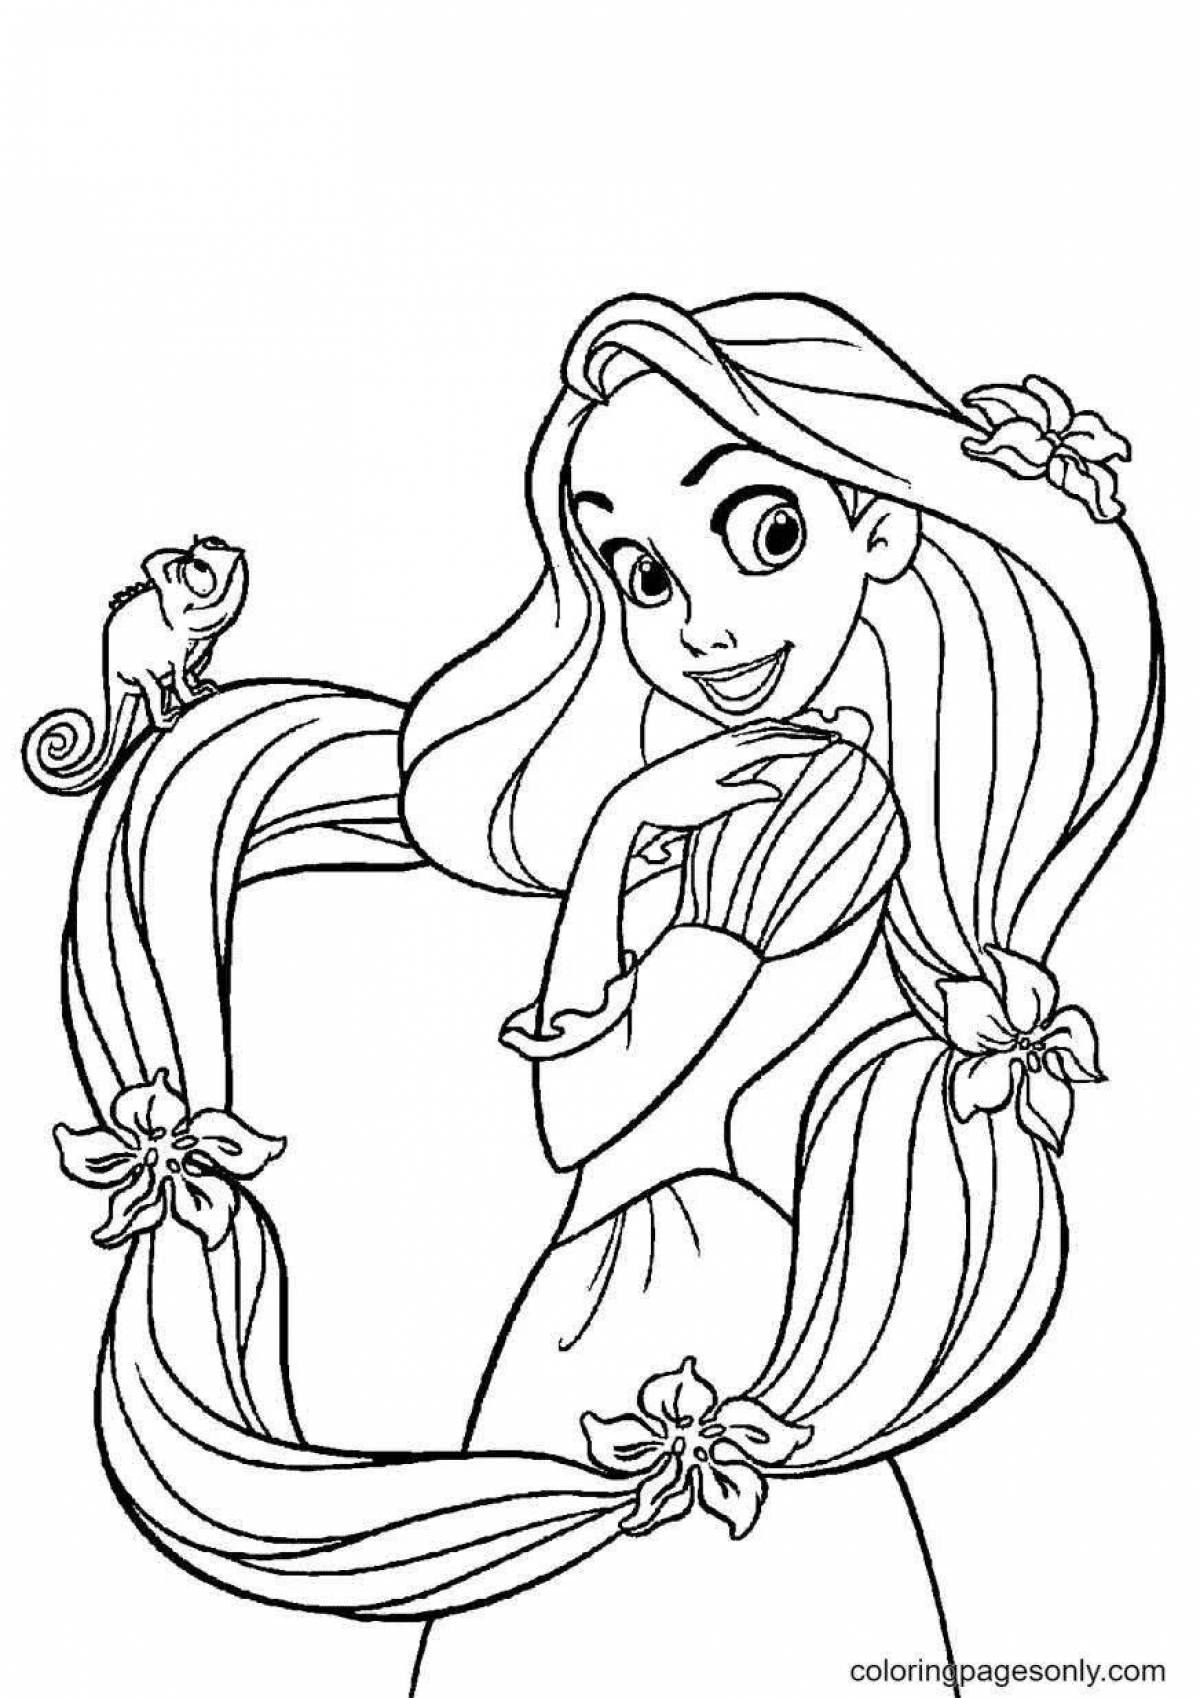 Rapunzel for children 5 6 years old #5